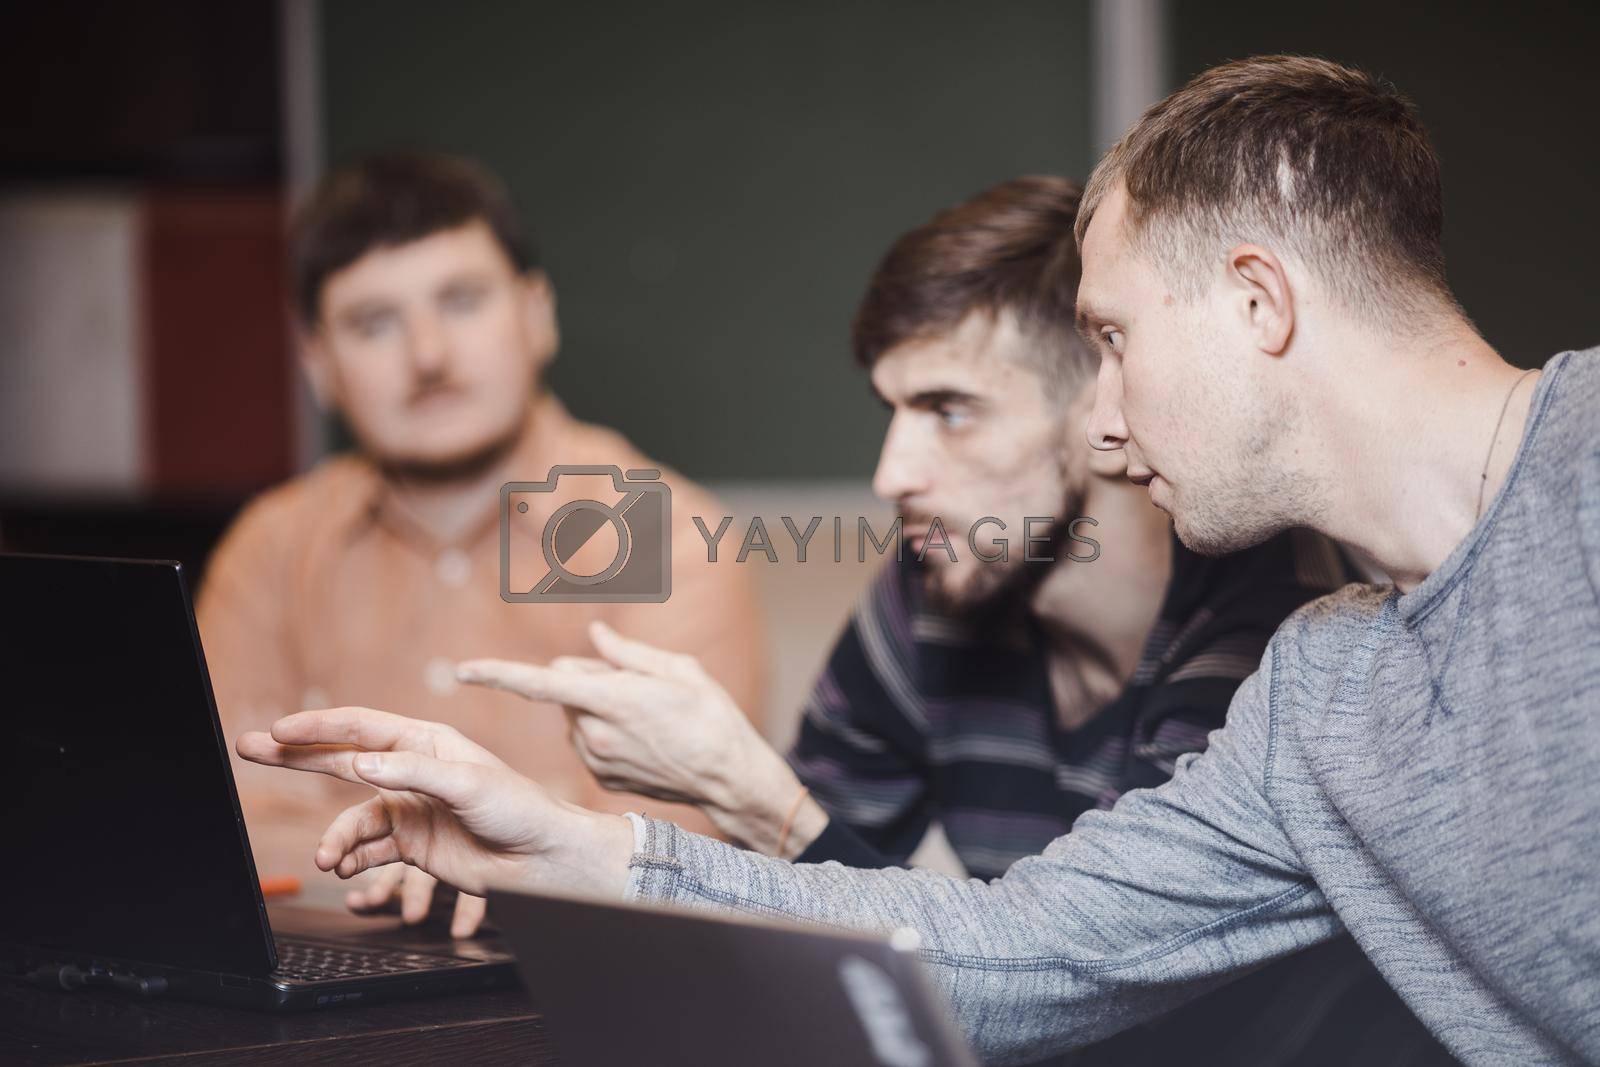 Royalty free image of People in classroom using laptops by Demkat